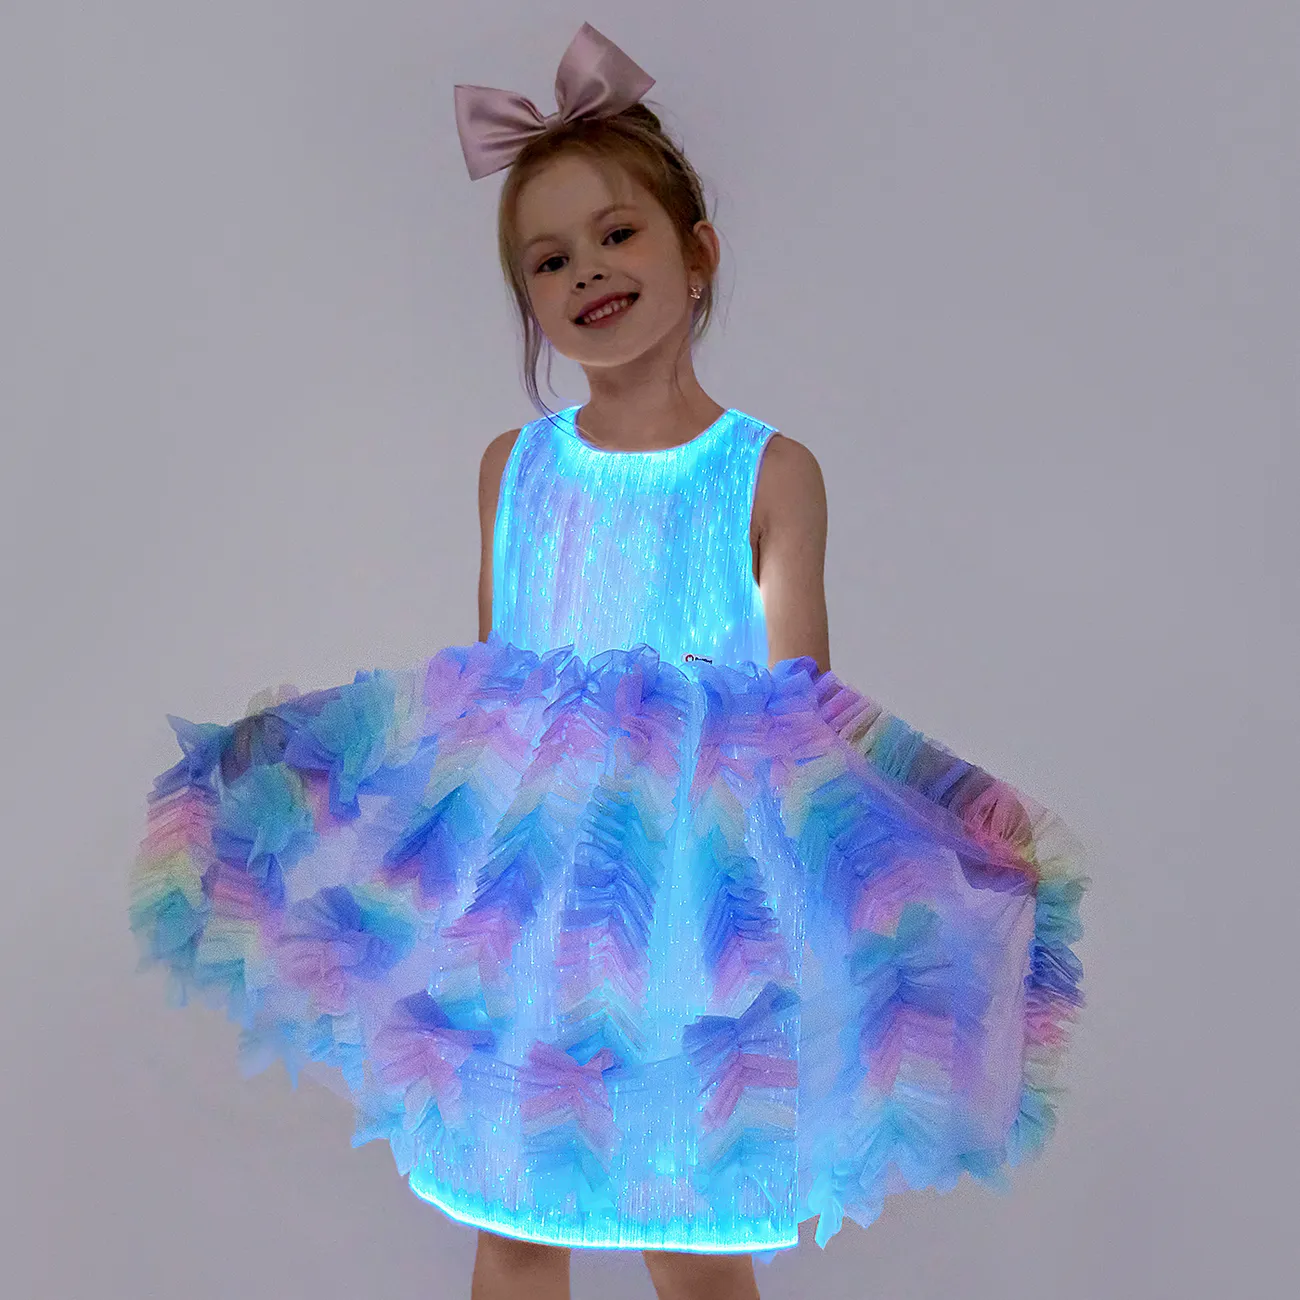 Go-Glow Light Up Colorful Princess Party Dress with Ruffled Skirt Including Controller (Built-In Battery) Multi-color big image 1